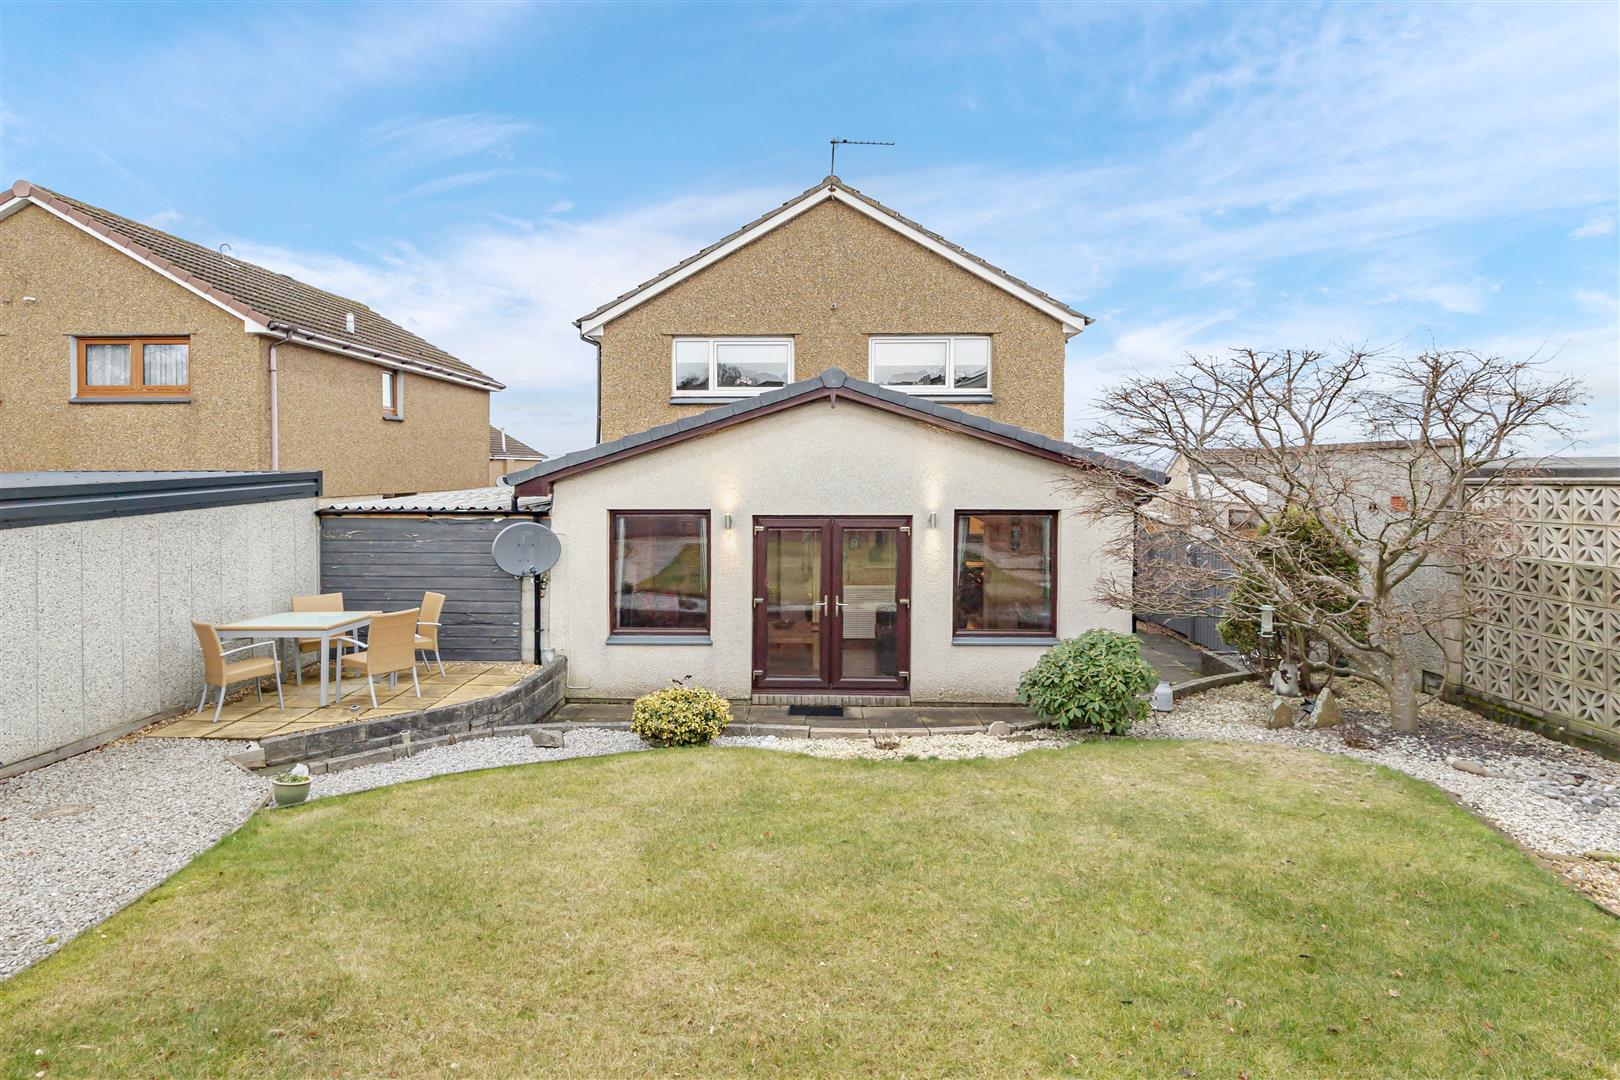 4 bed detached house for sale in Viewforth Drive, Falkirk  - Property Image 1